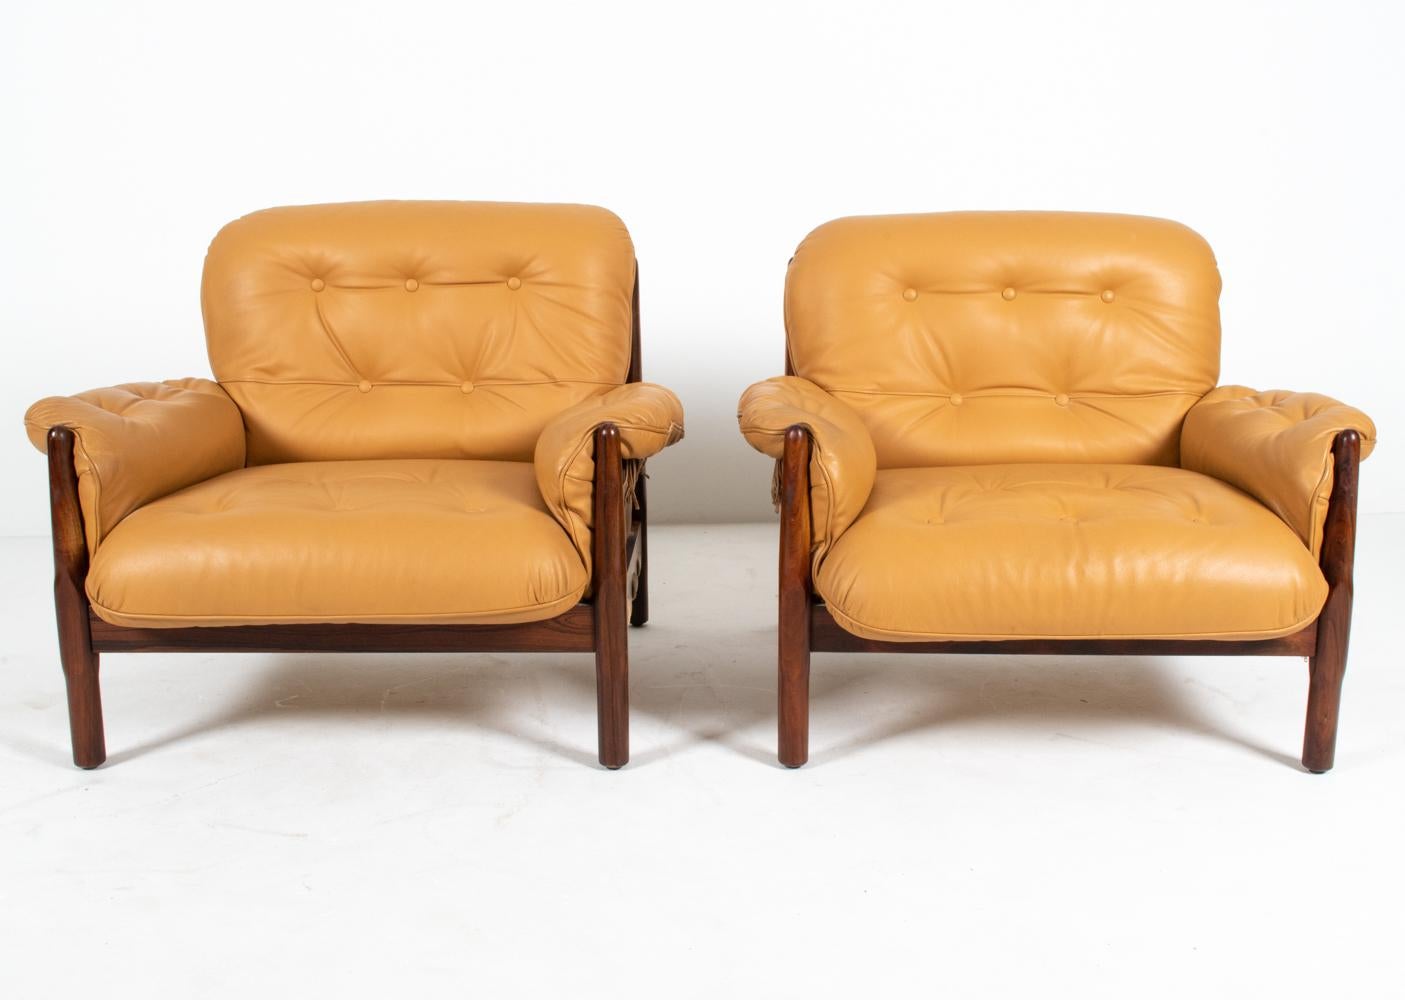 20th Century Pair of Brazilian Modernist Rosewood & Leather Easy Chairs, circa 1970s For Sale